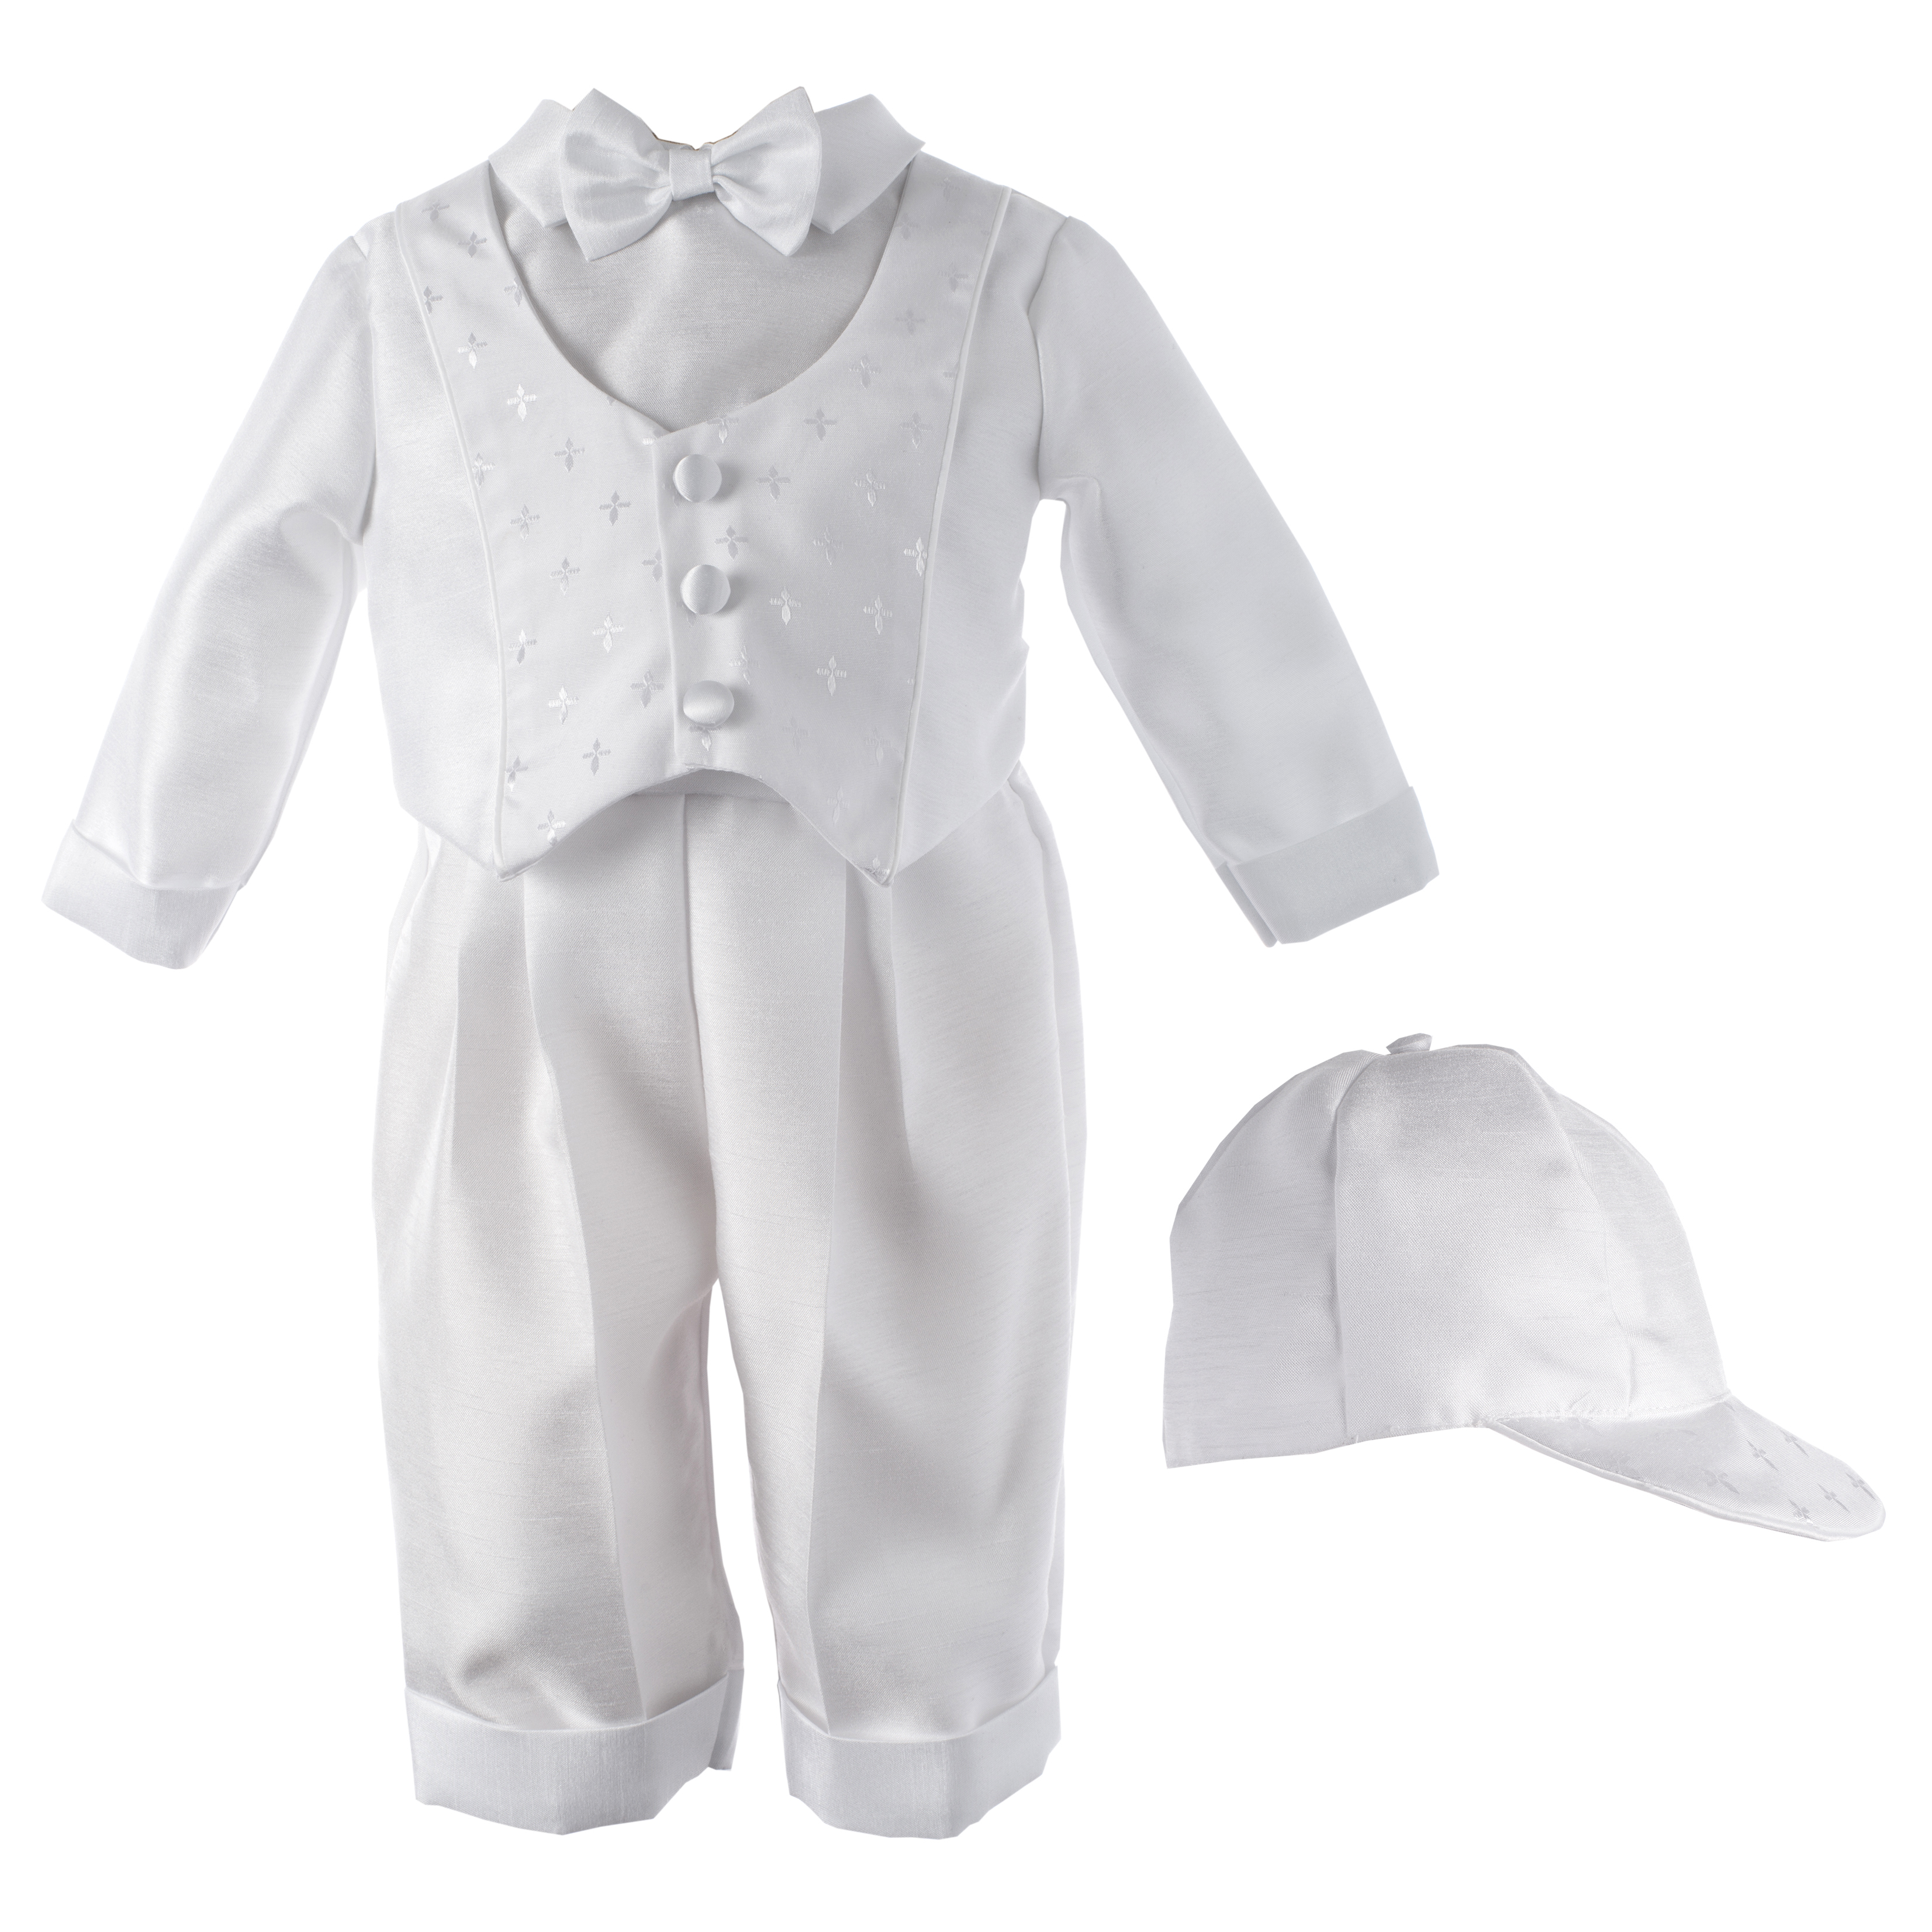 baptism outfit stores